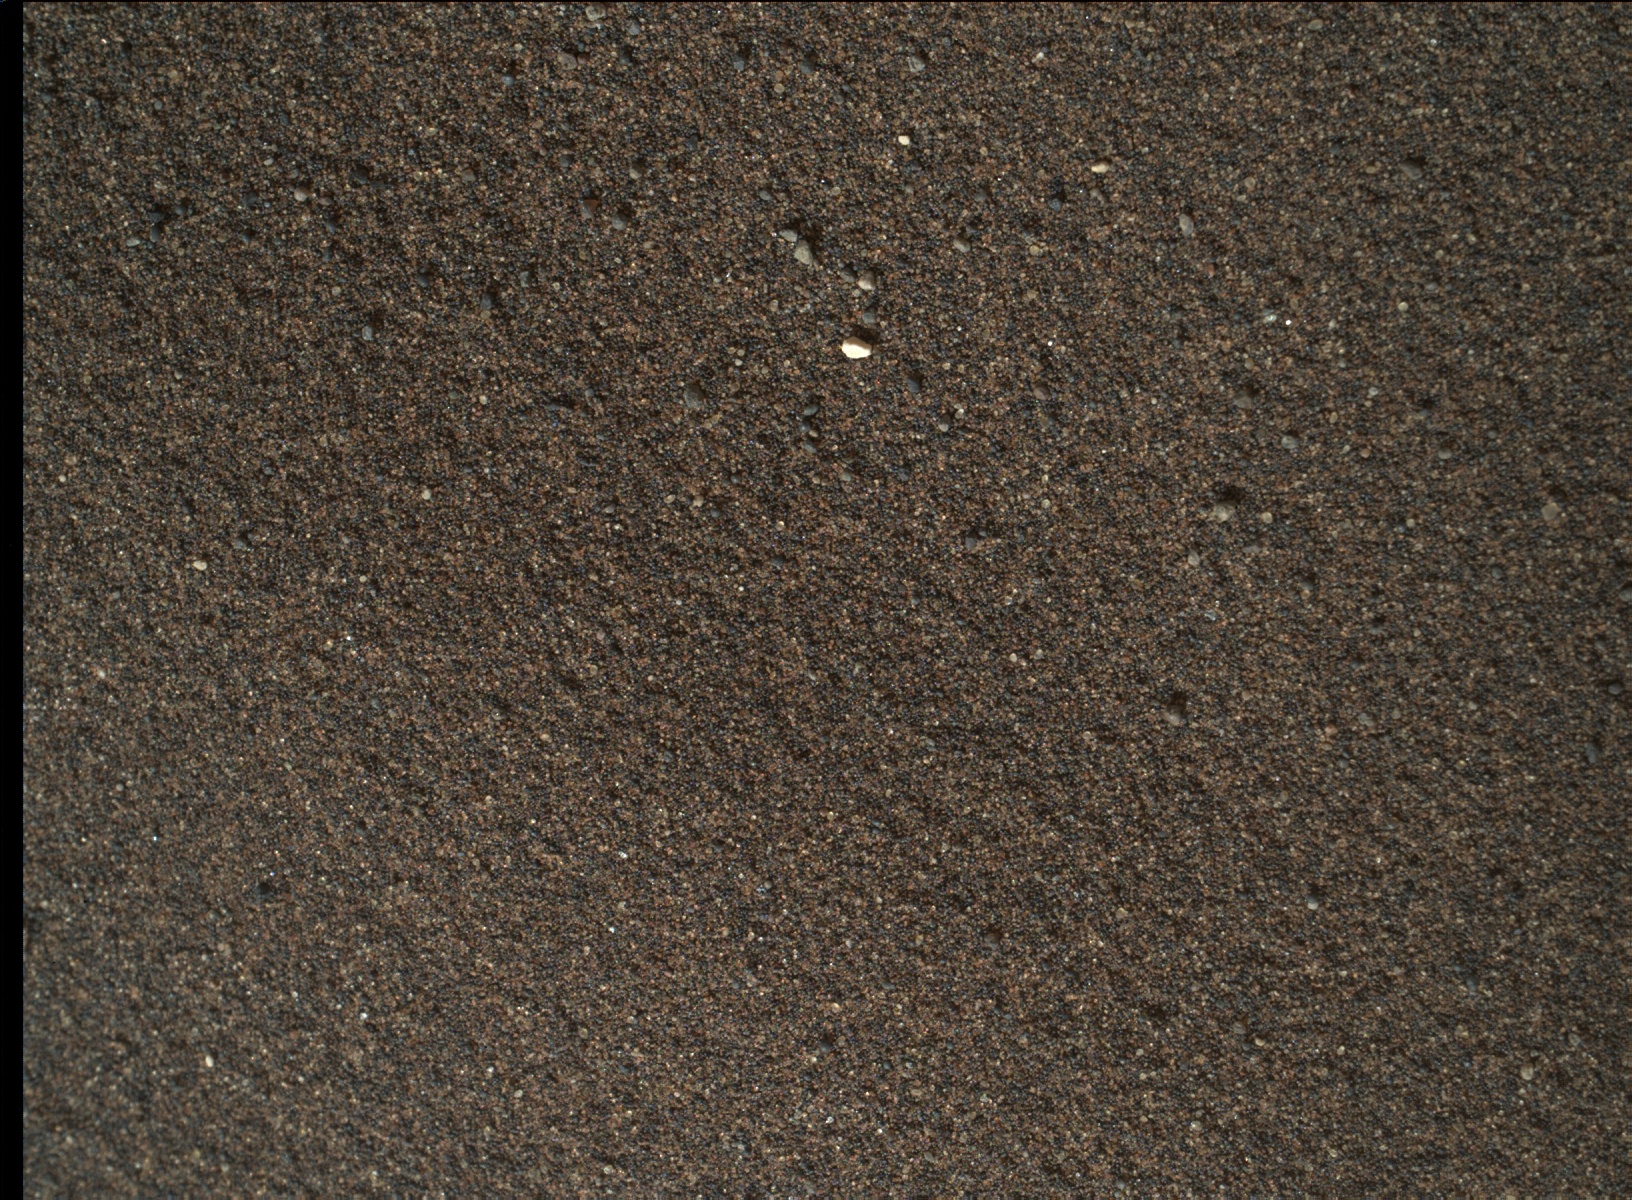 Nasa's Mars rover Curiosity acquired this image using its Mars Hand Lens Imager (MAHLI) on Sol 1518